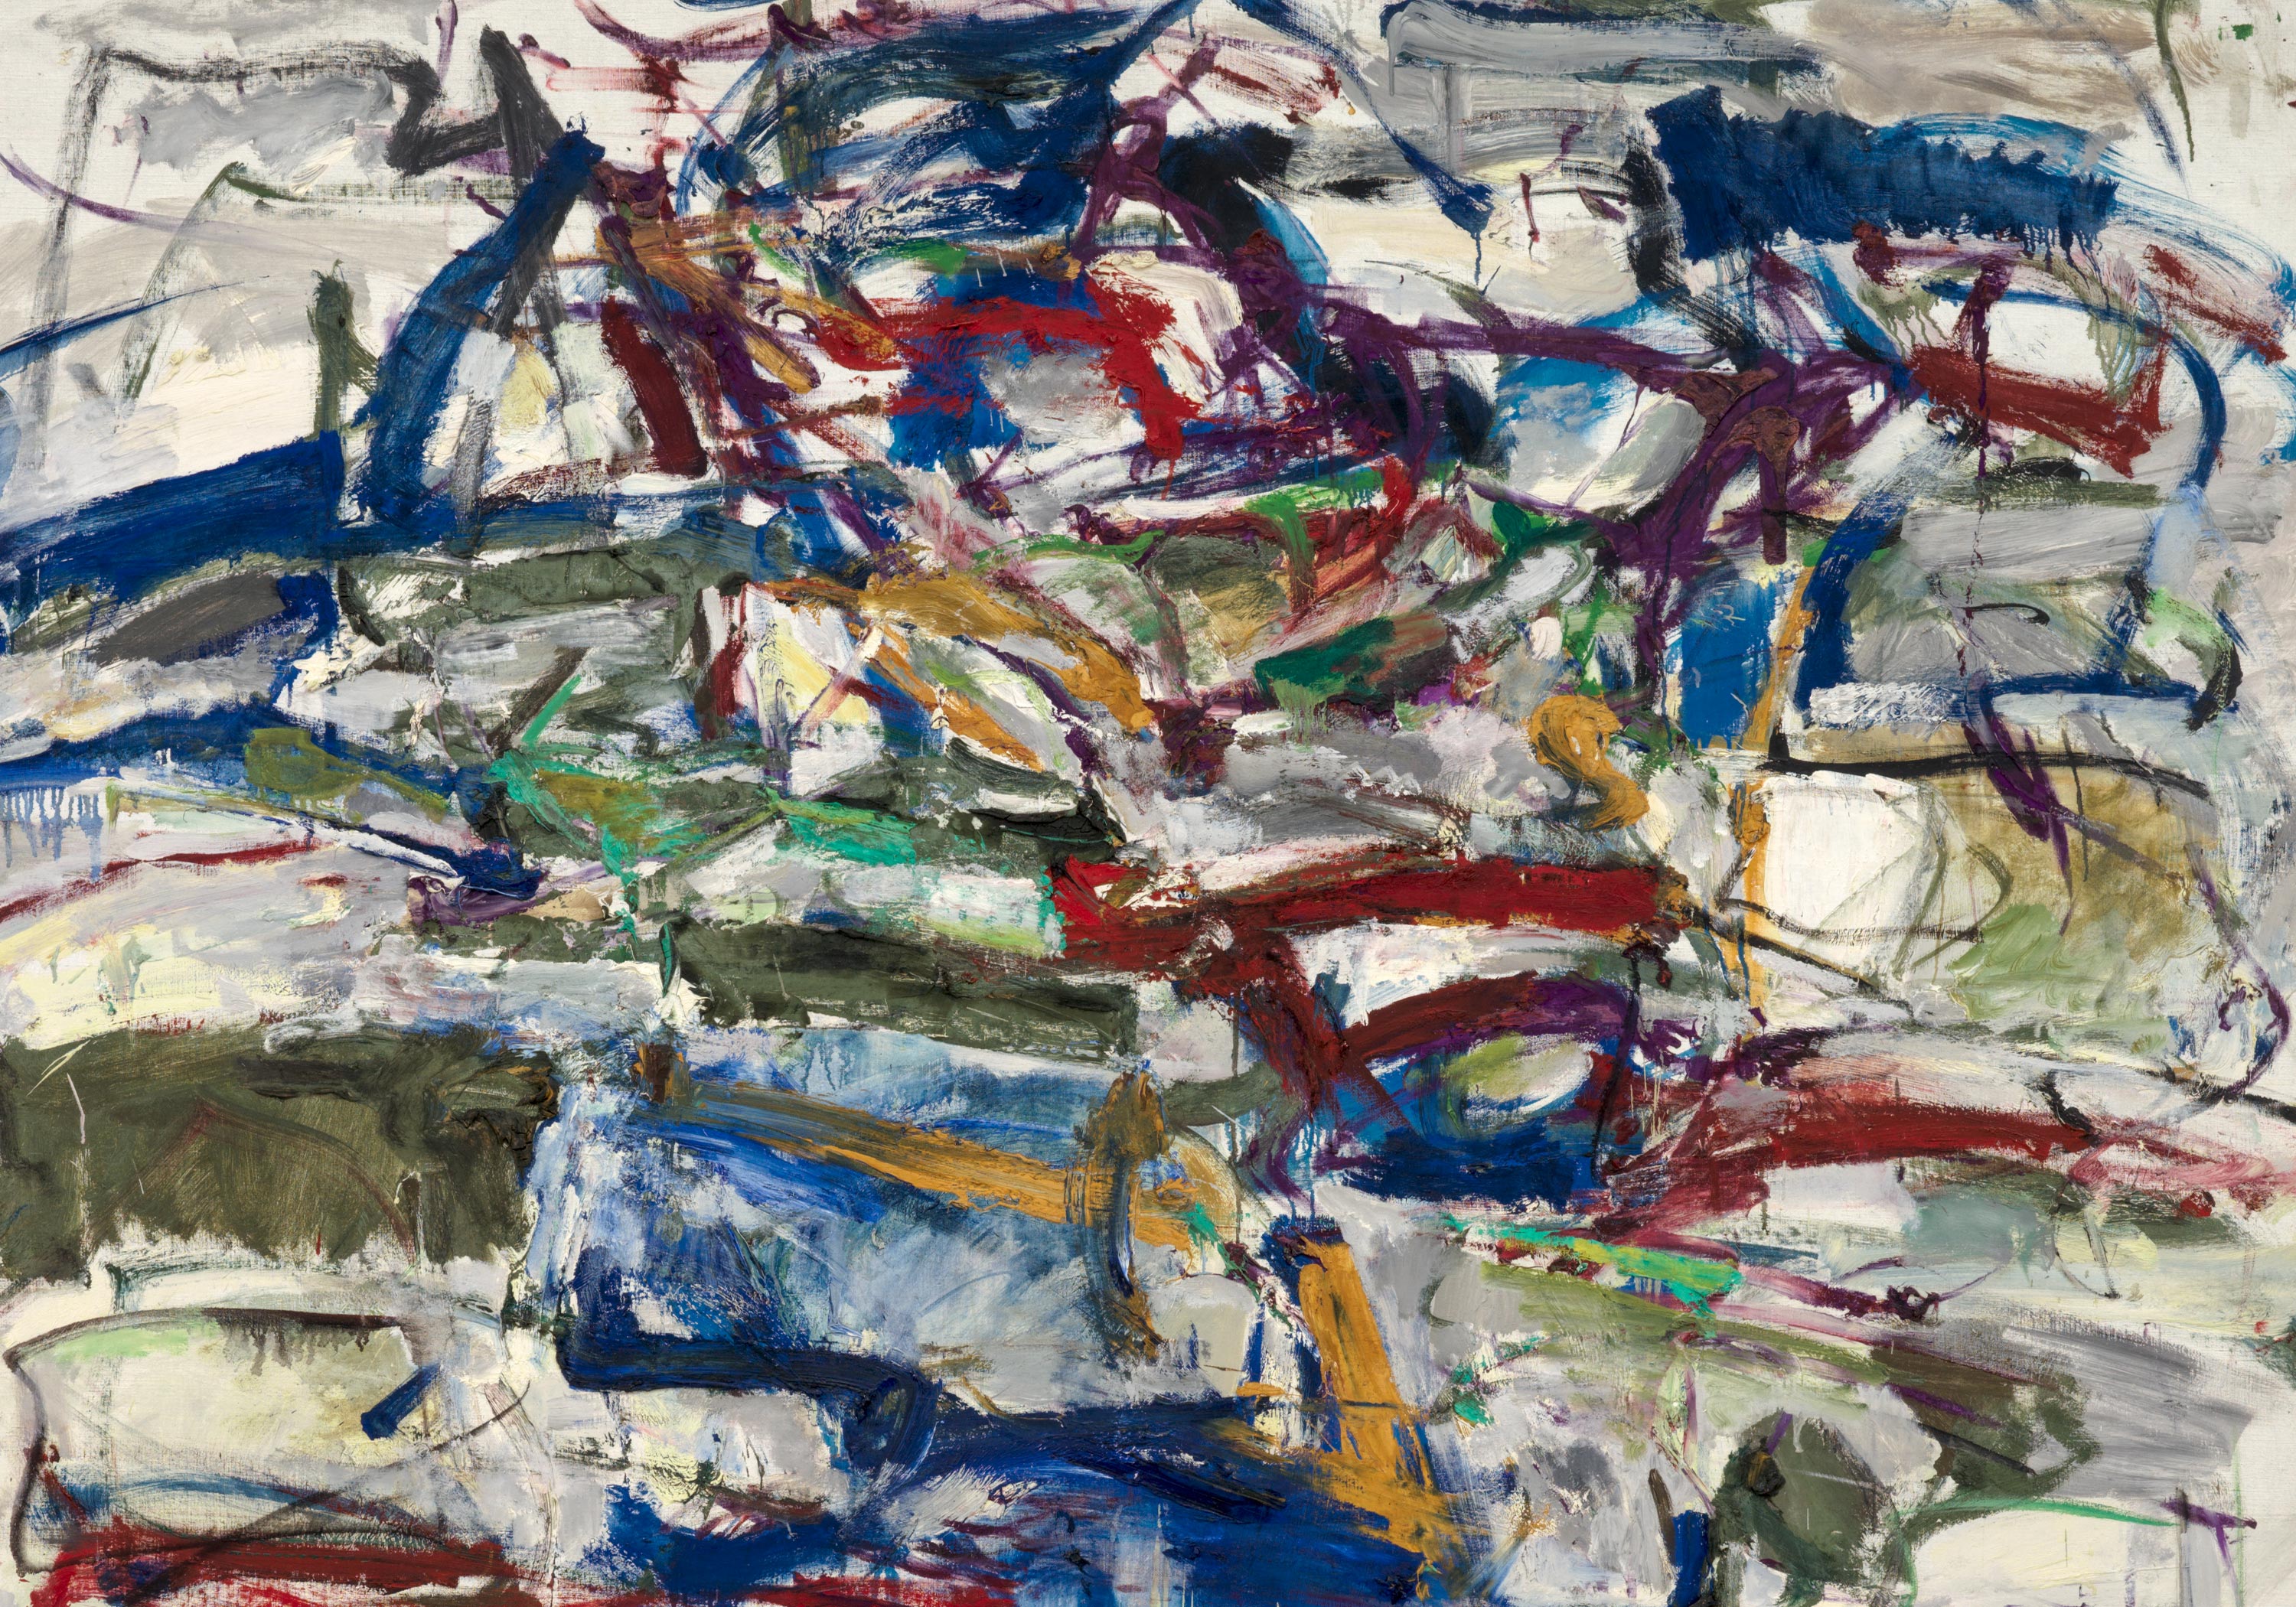 Detail of Untitled, c. 1959 by Joan Mitchell